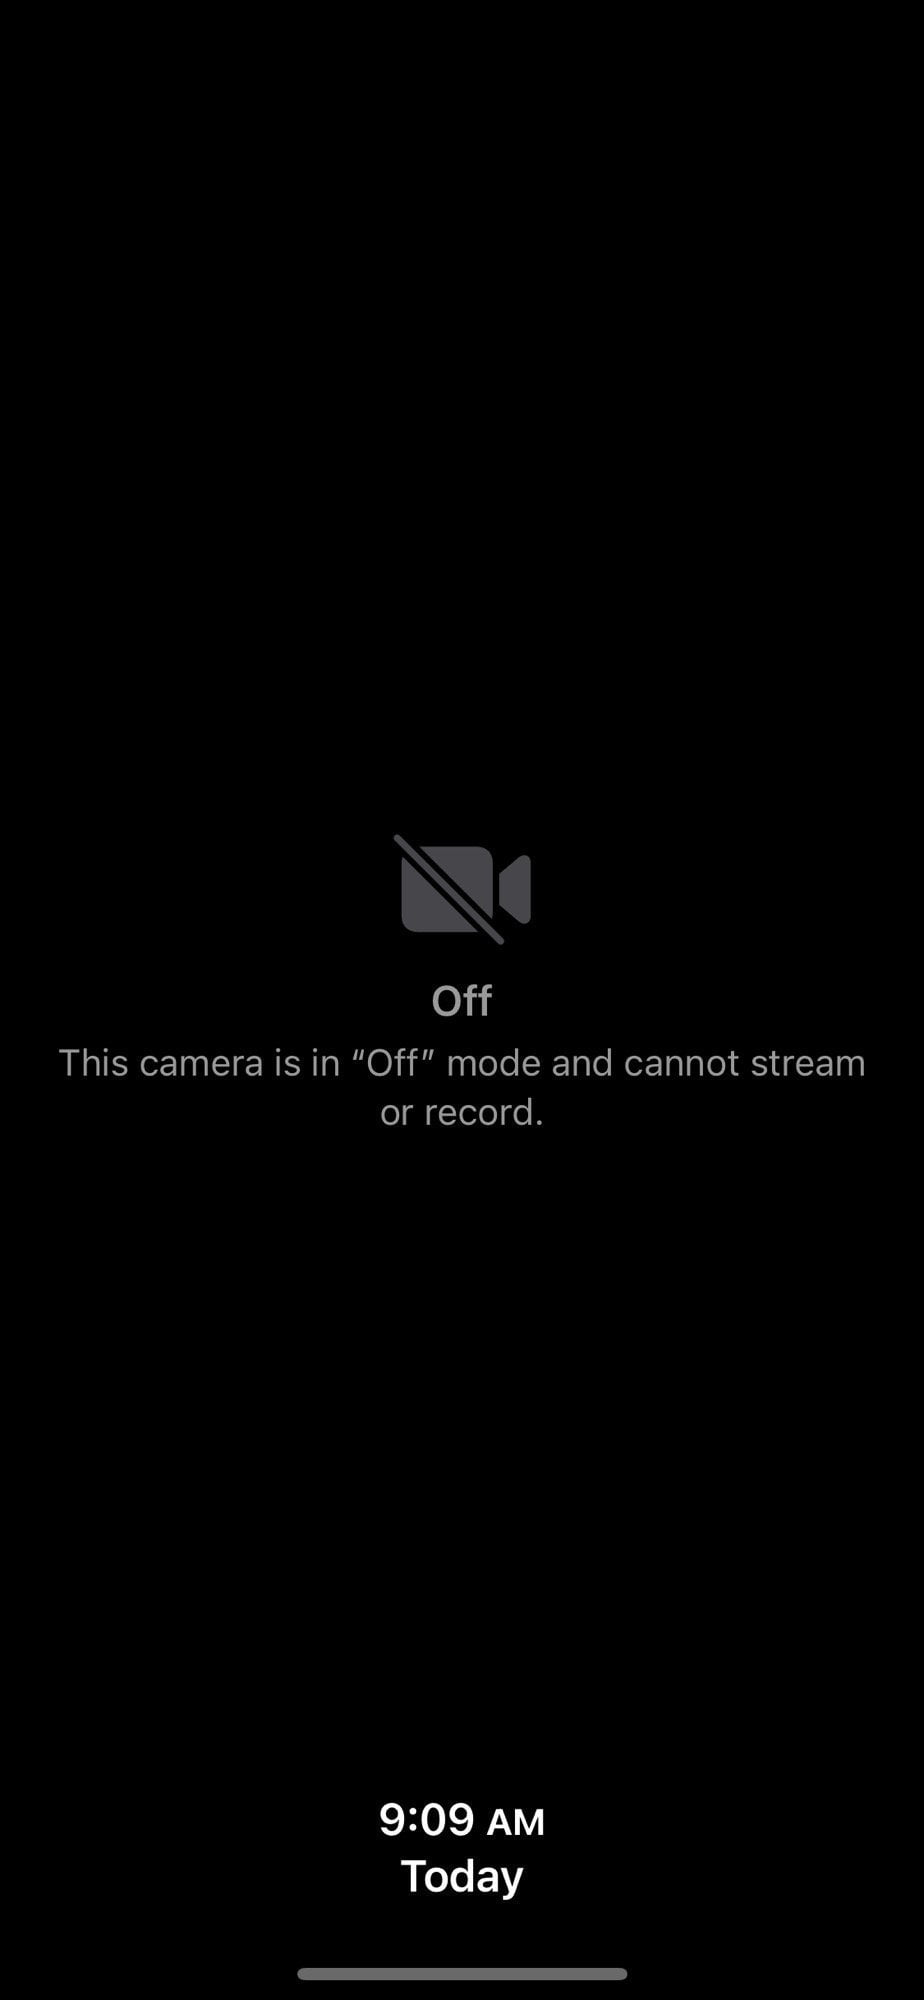 The Eufy camera is displayed in Off mode in the